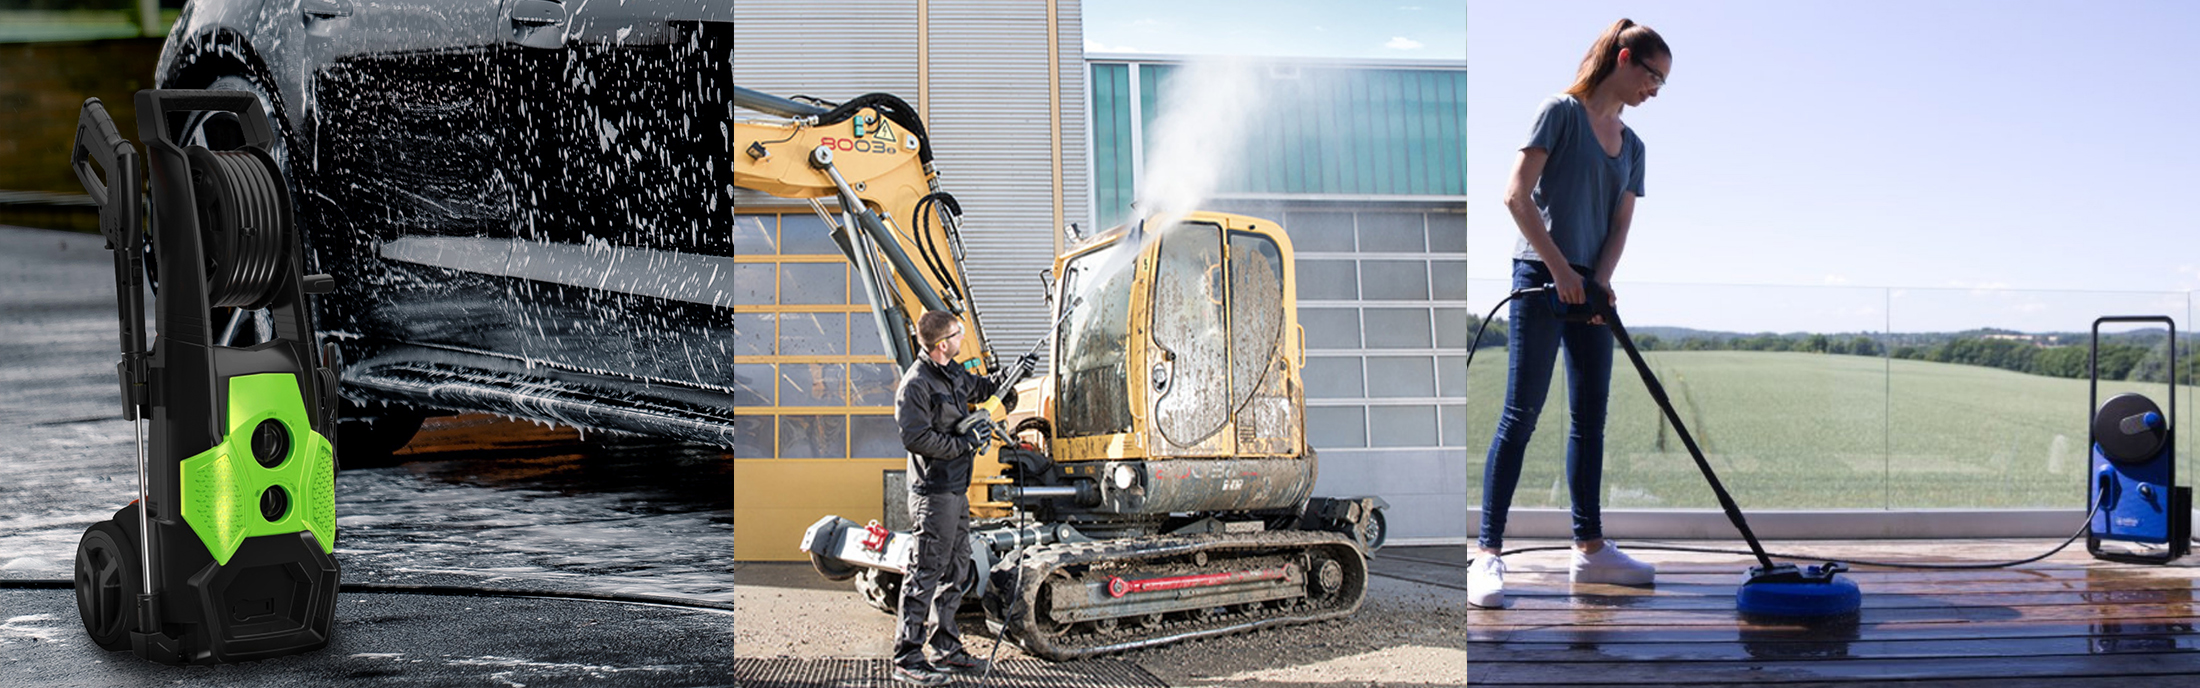 We Offer A Great Range Of Pressure Cleaners